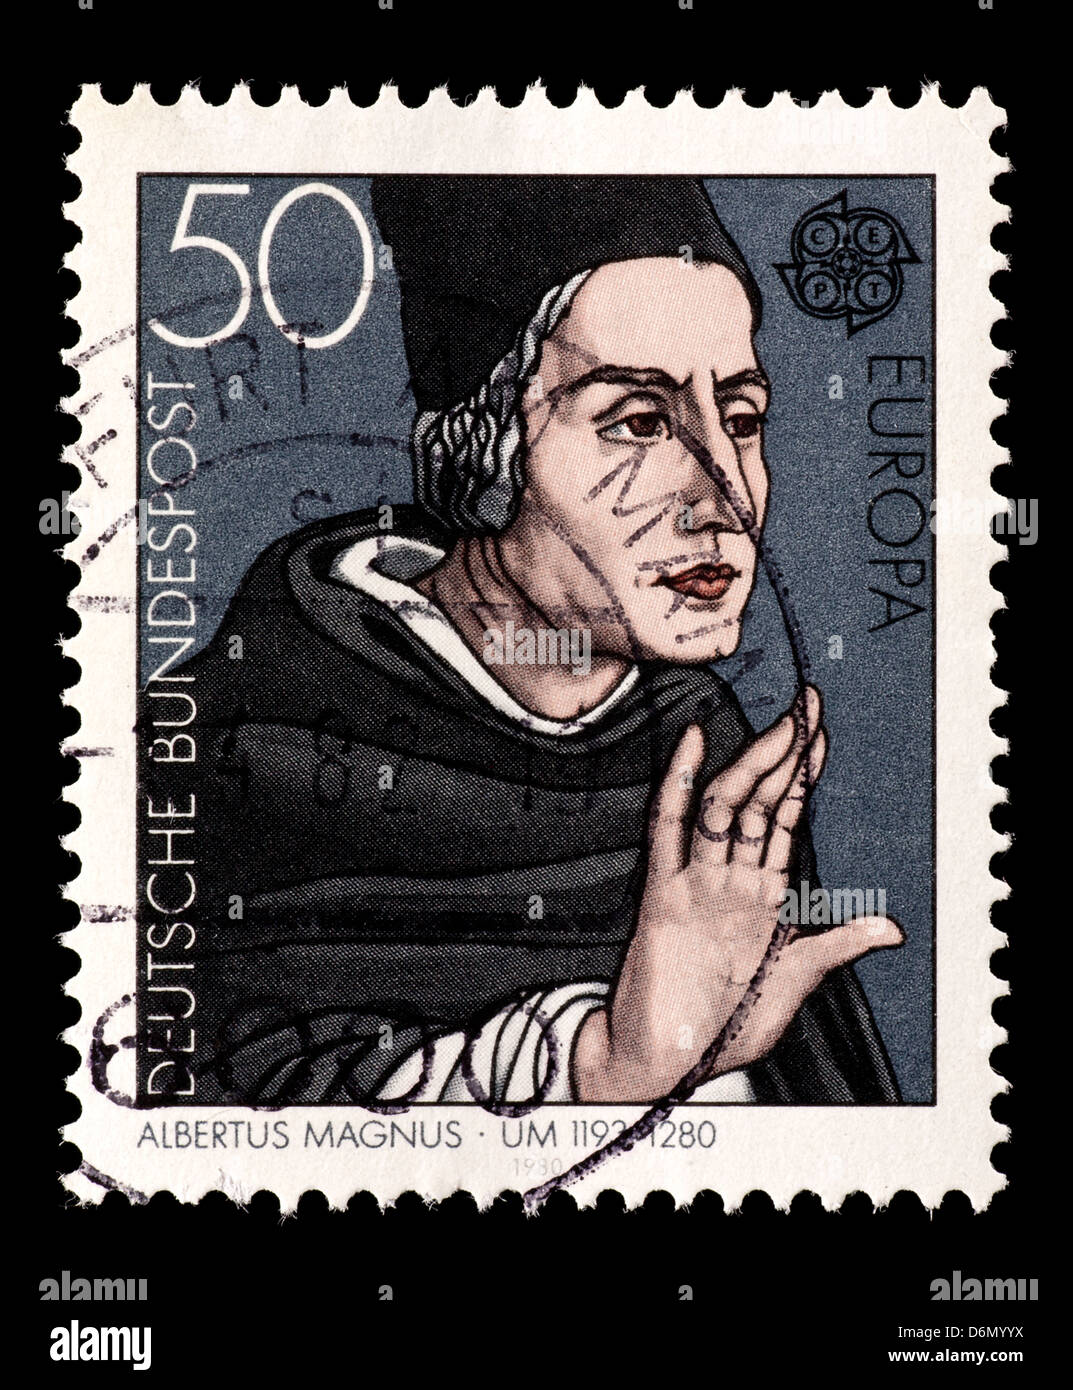 Postage stamp from (West) Germany depicting Albertus Magnus. Stock Photo